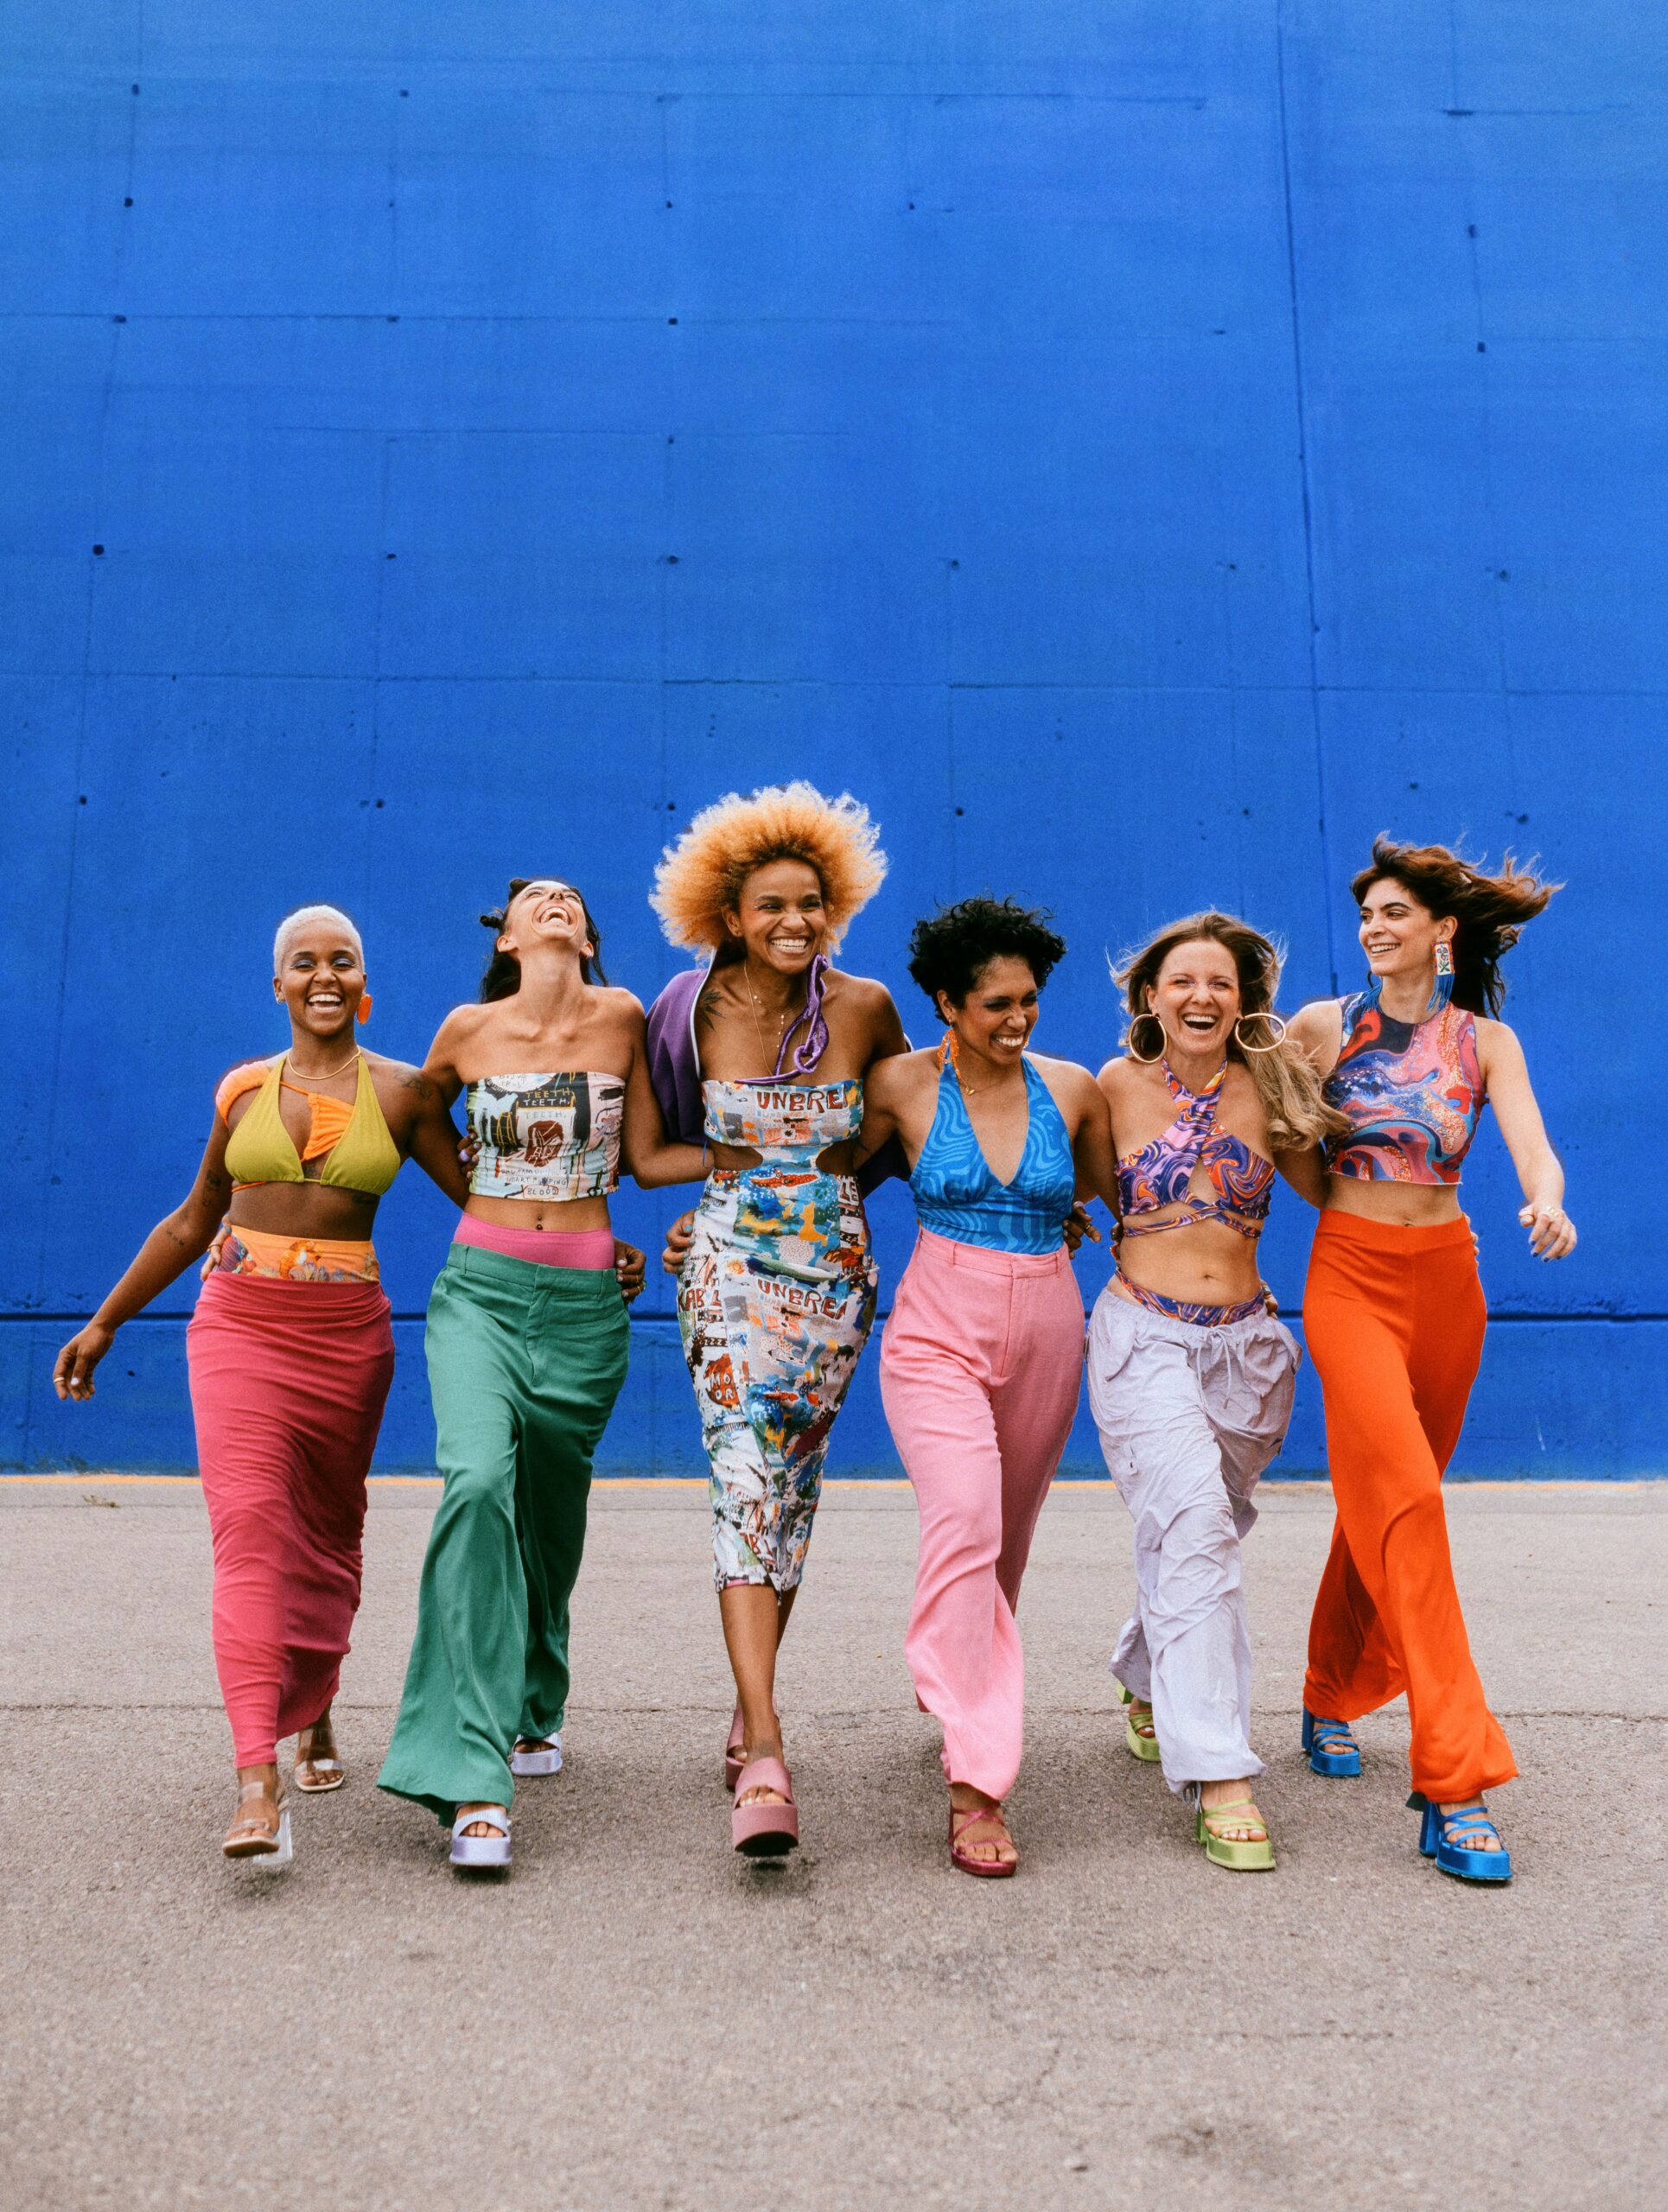 Six women in colorful clothes walk hand in hand, smiling.